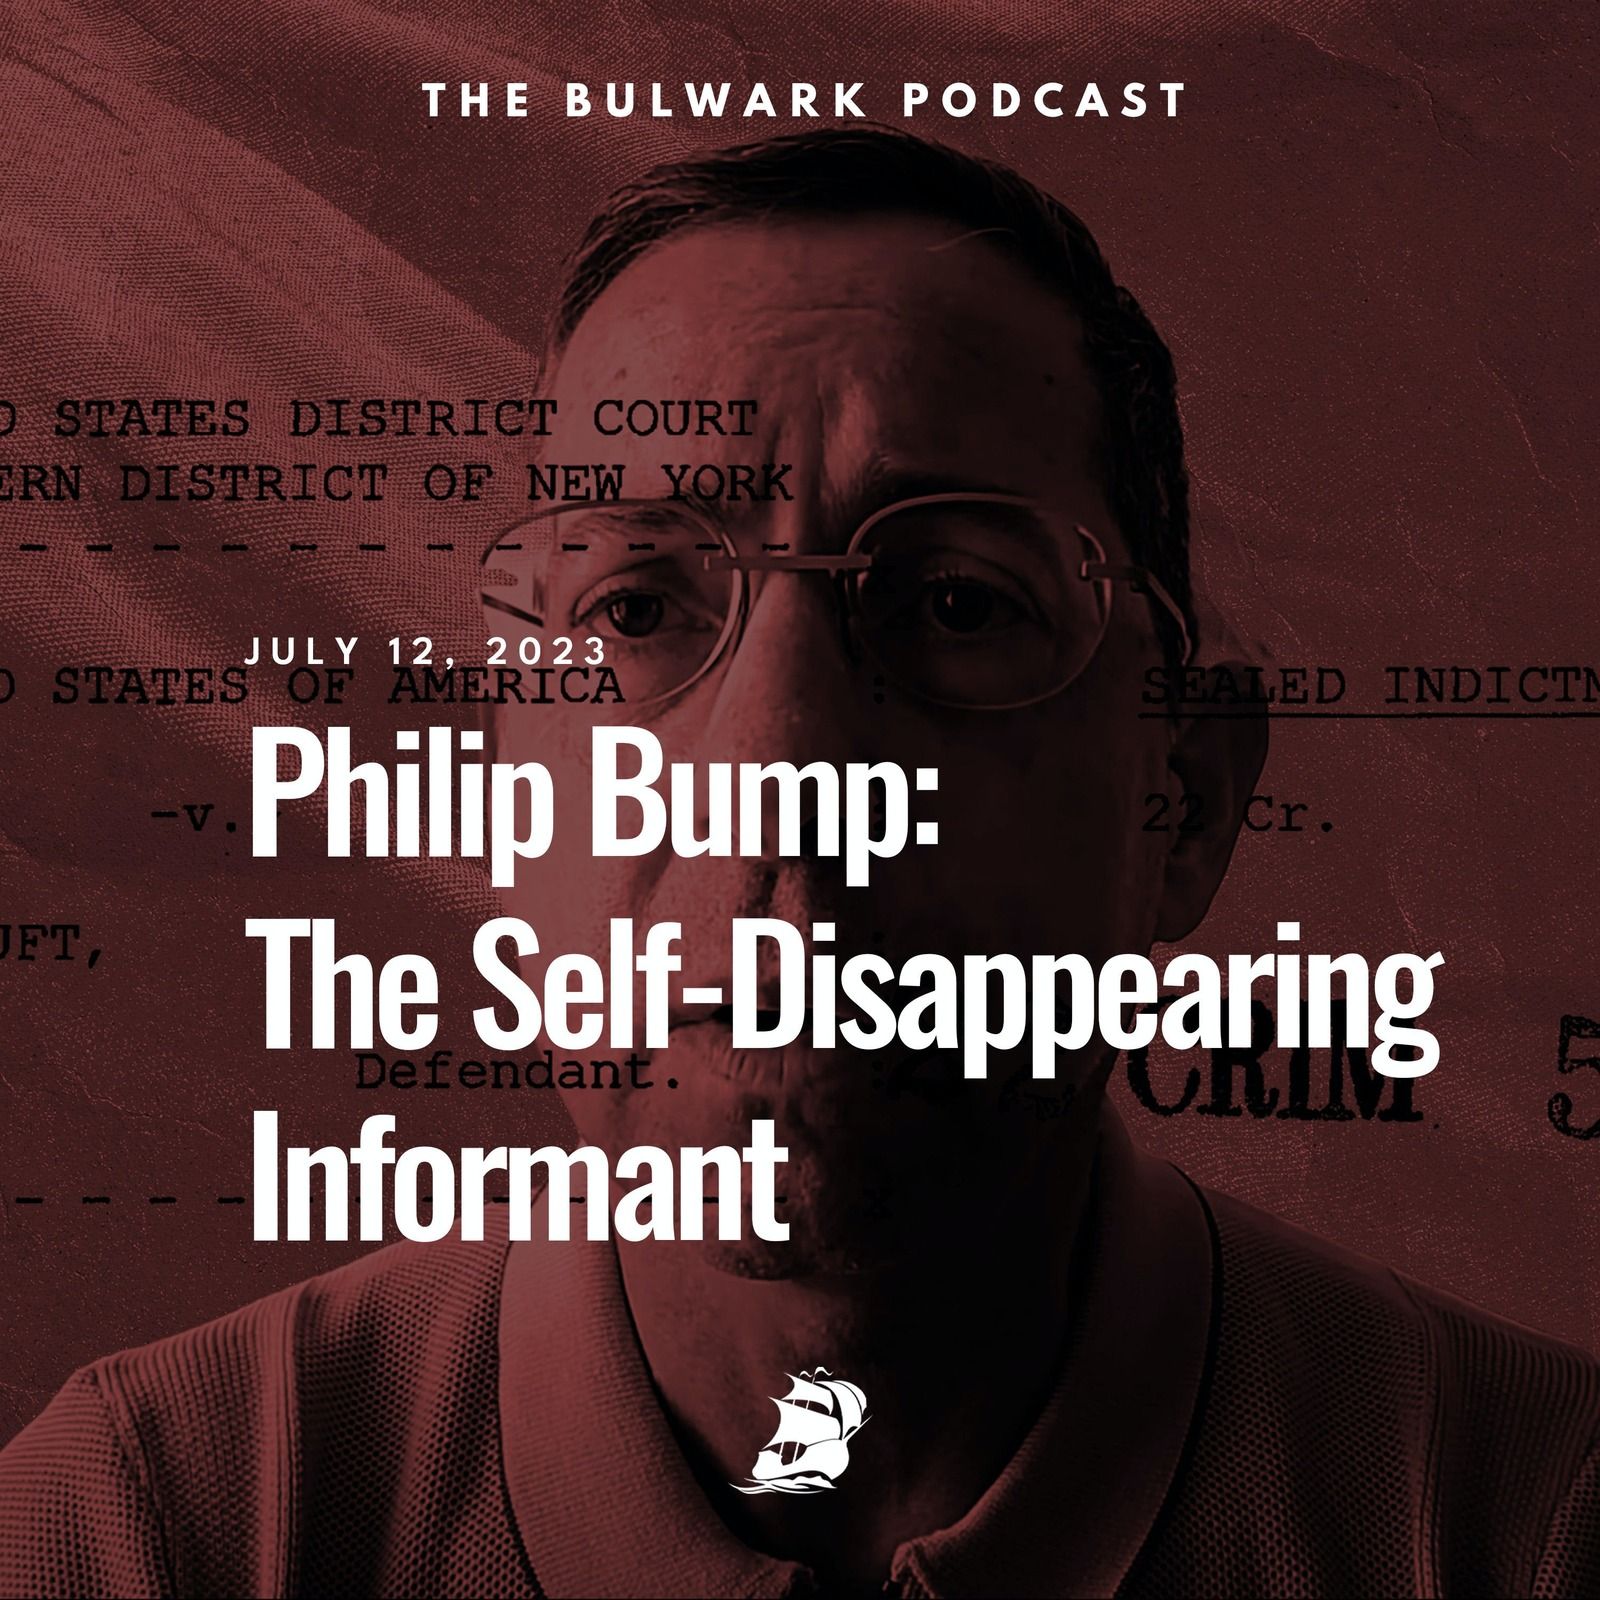 Philip Bump: The Self-Disappearing Informant